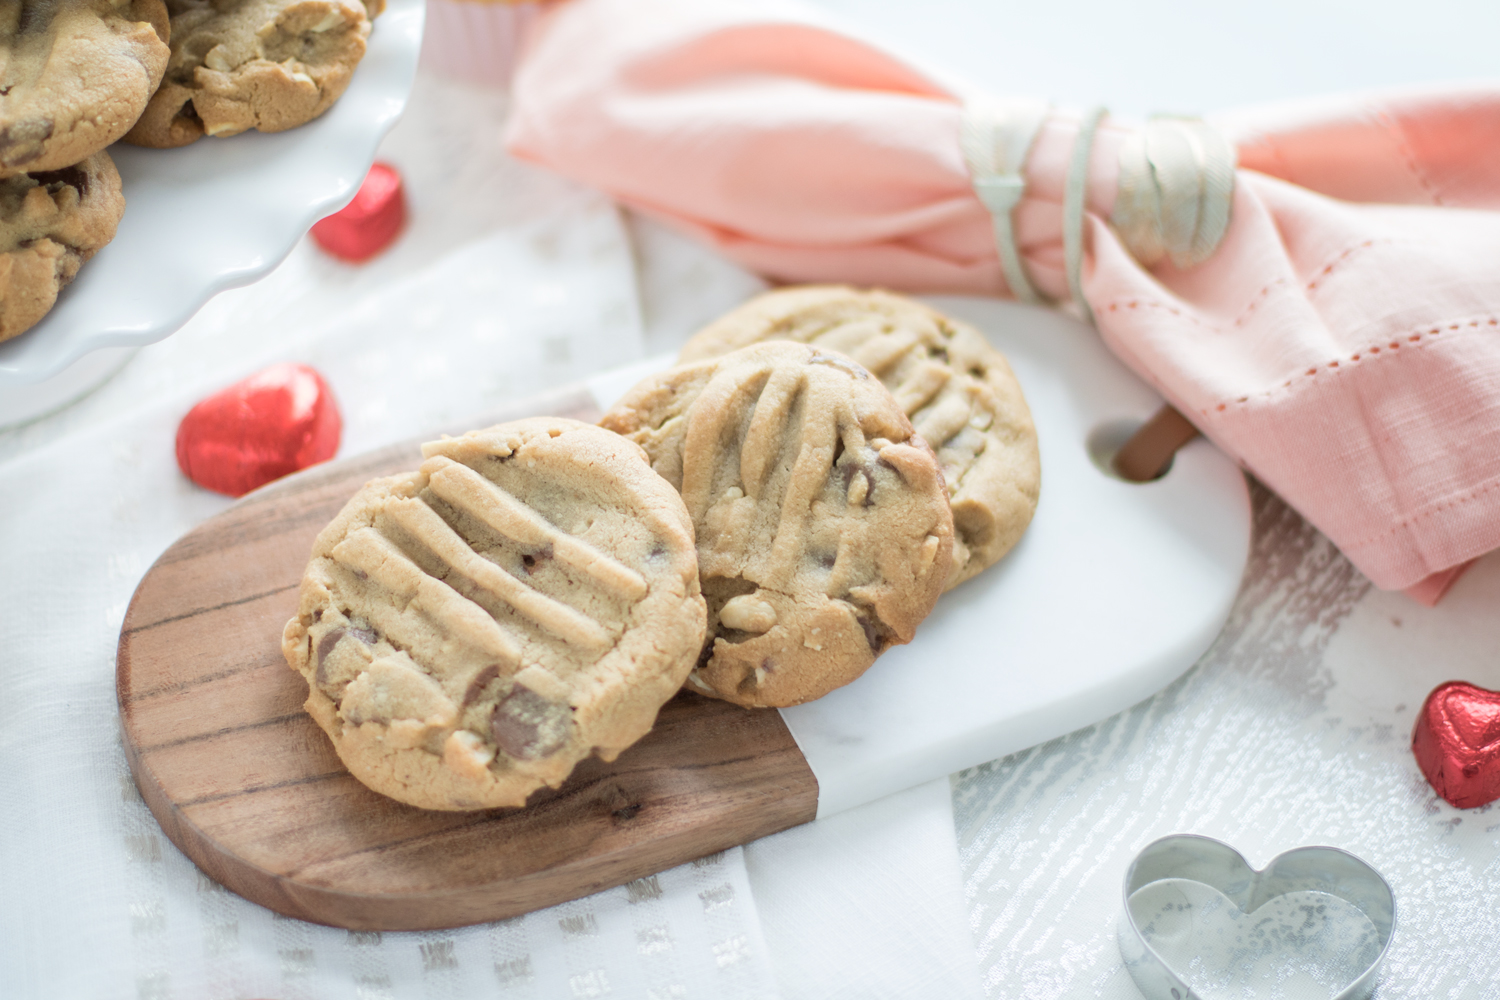 Peanut Butter Explosion Cookies